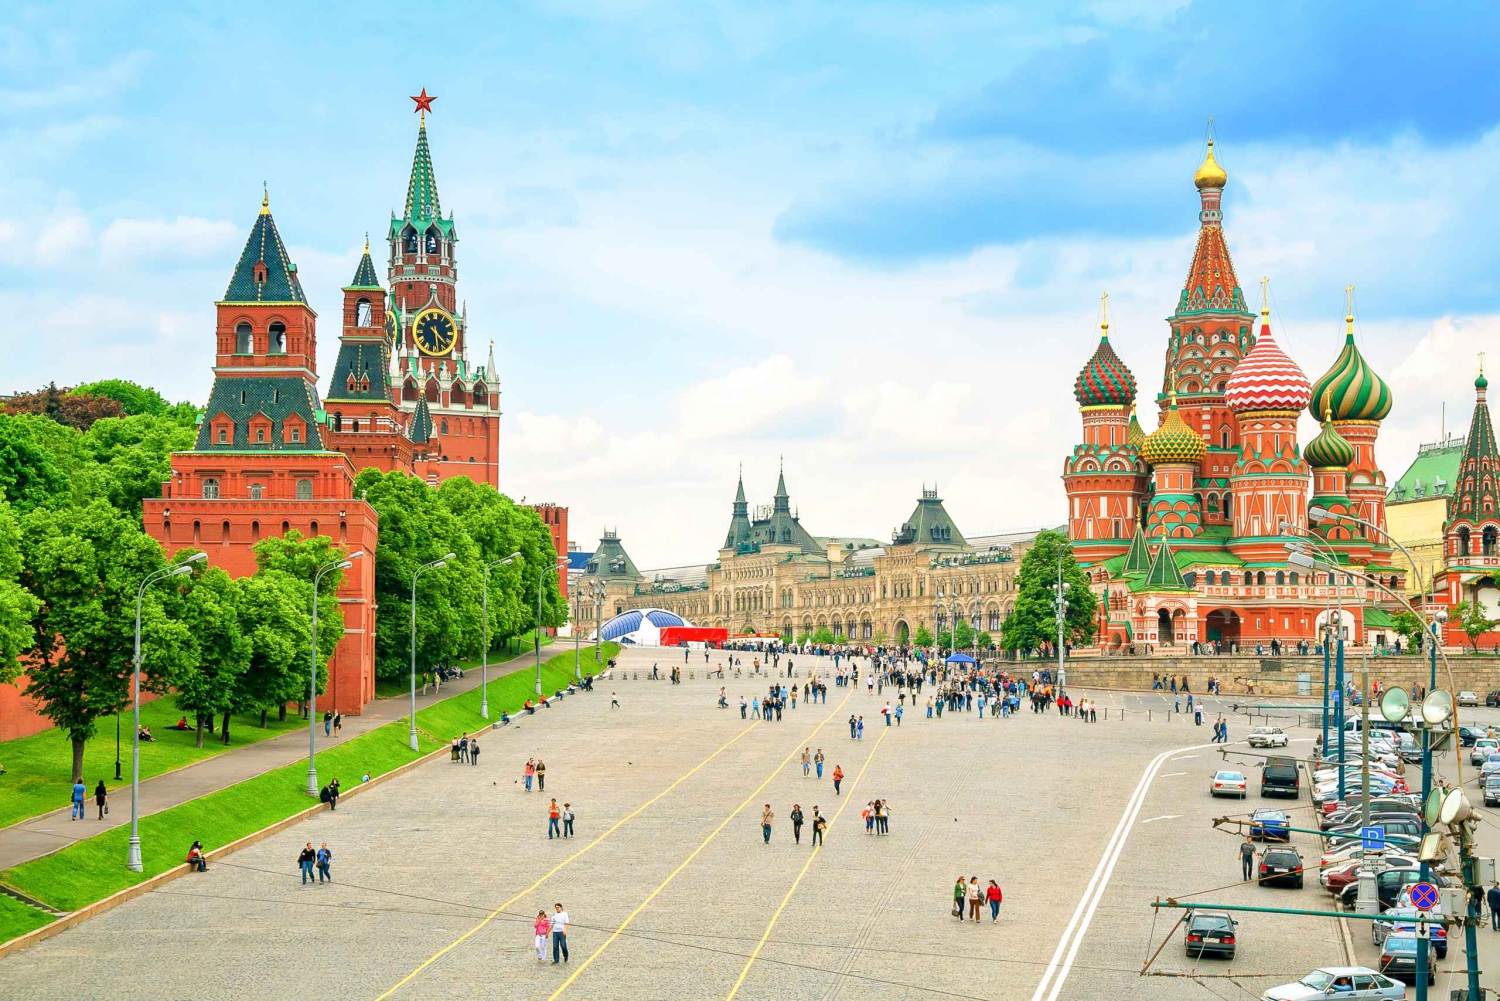 St. Basil's Cathedral Ticket and 90-Minute Red Square Tour